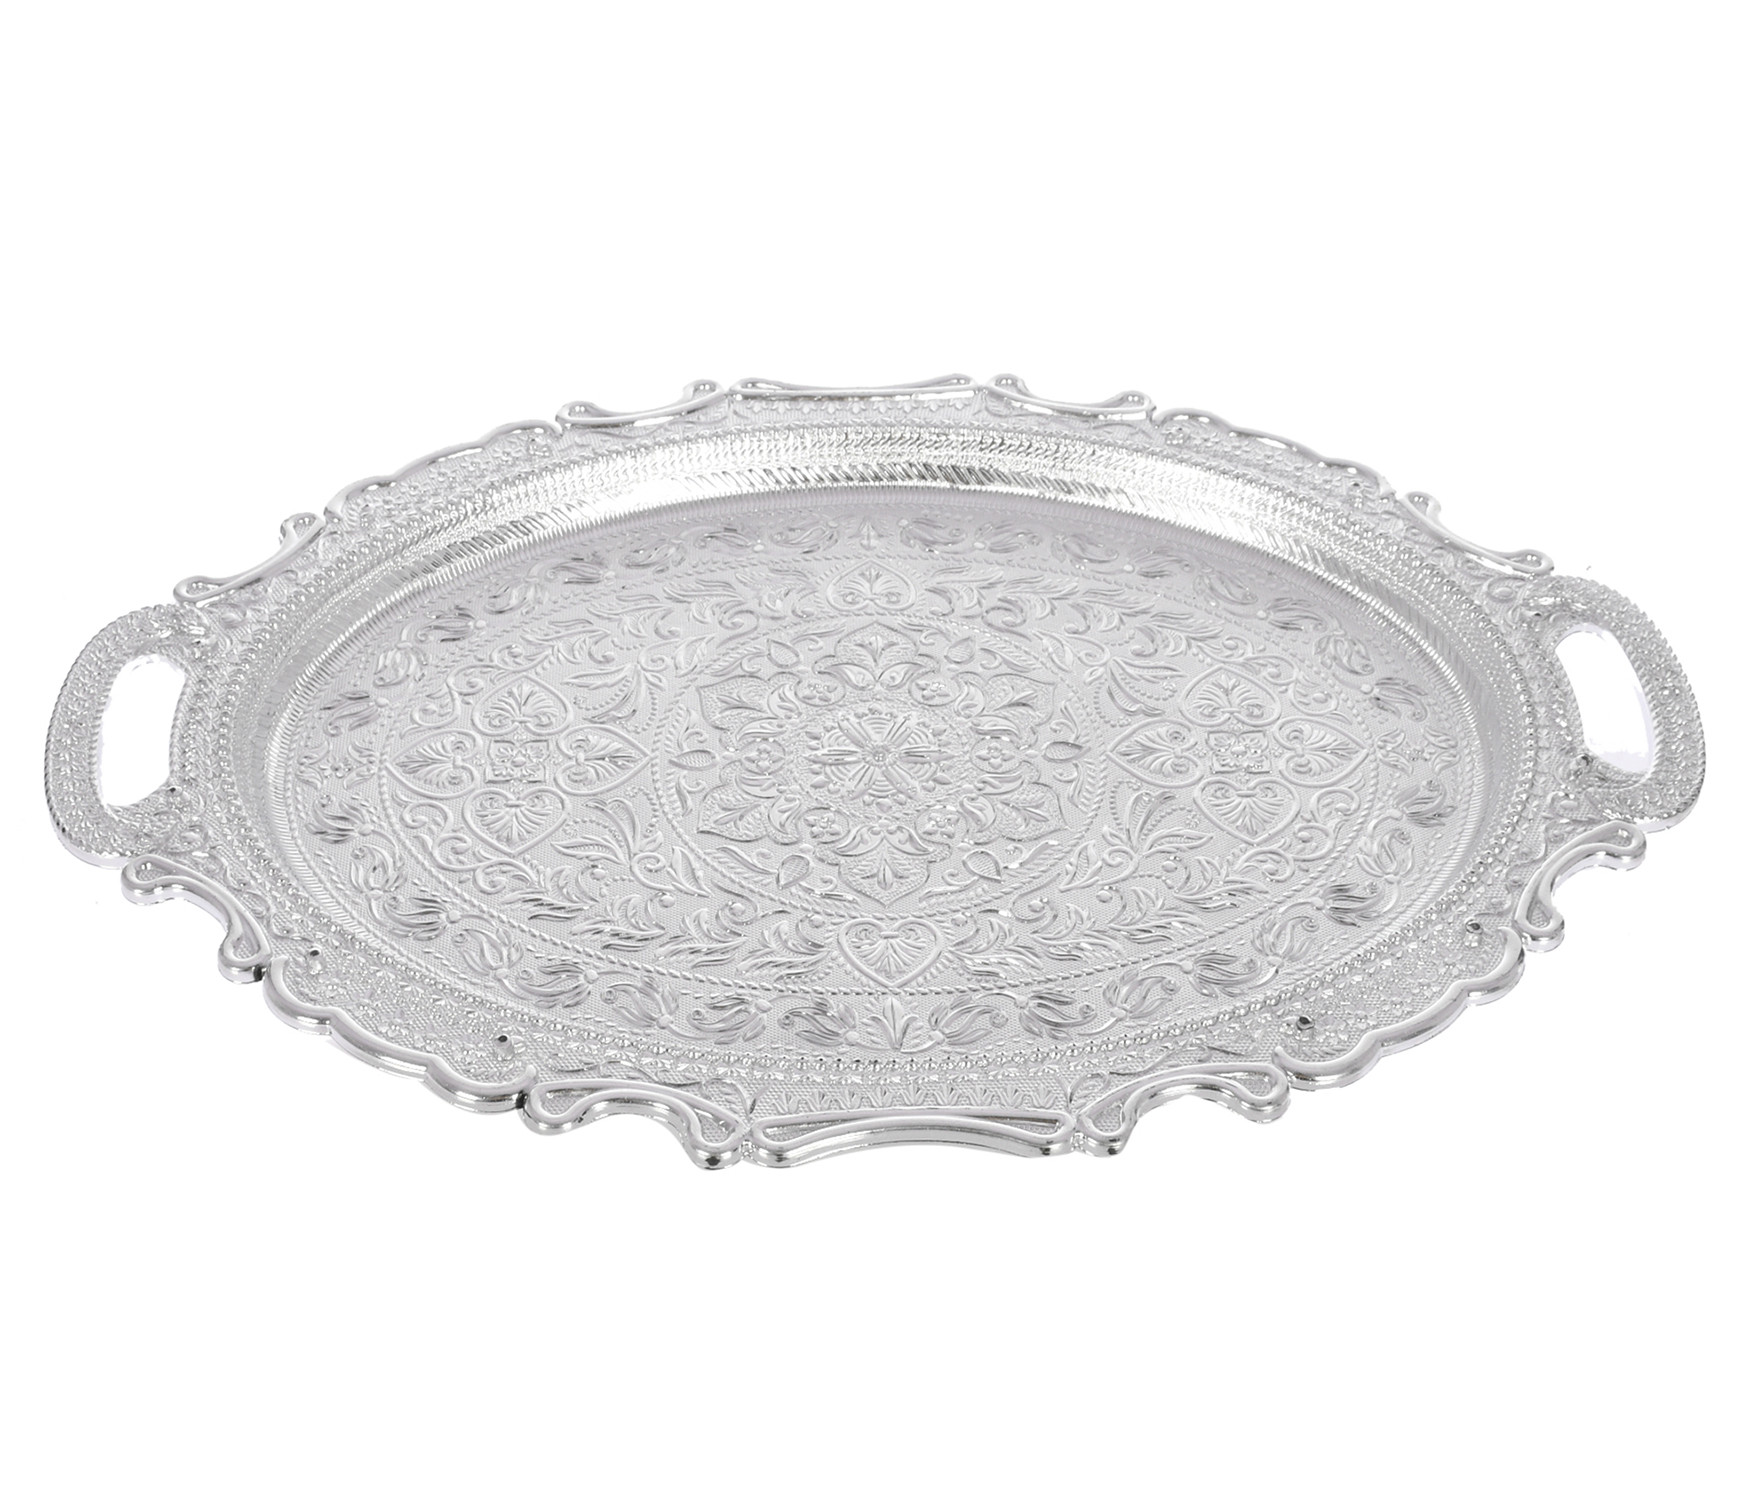 Kuber Industries Traditional Design Plastic Serving Tray For Home, Office, Restaurant, Hotel (Silver)